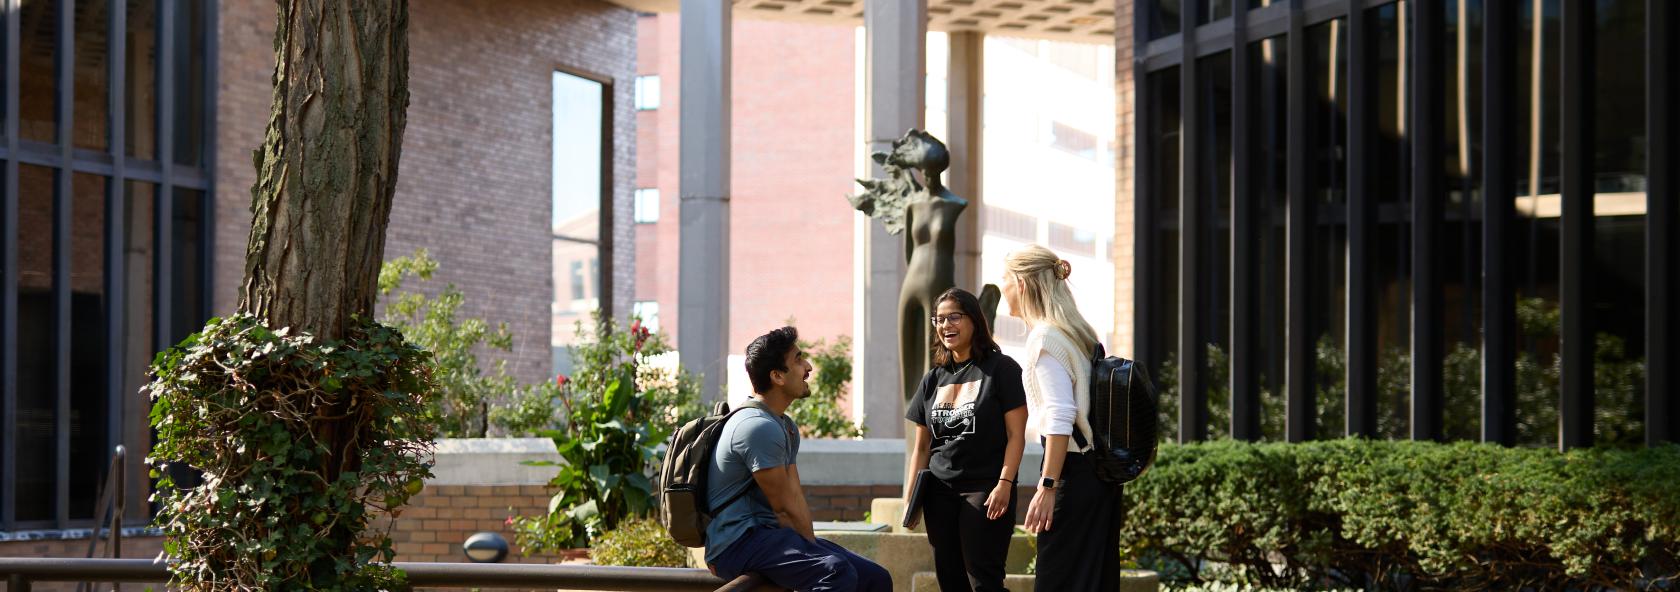 Medical Humanities students walk through the courtyard